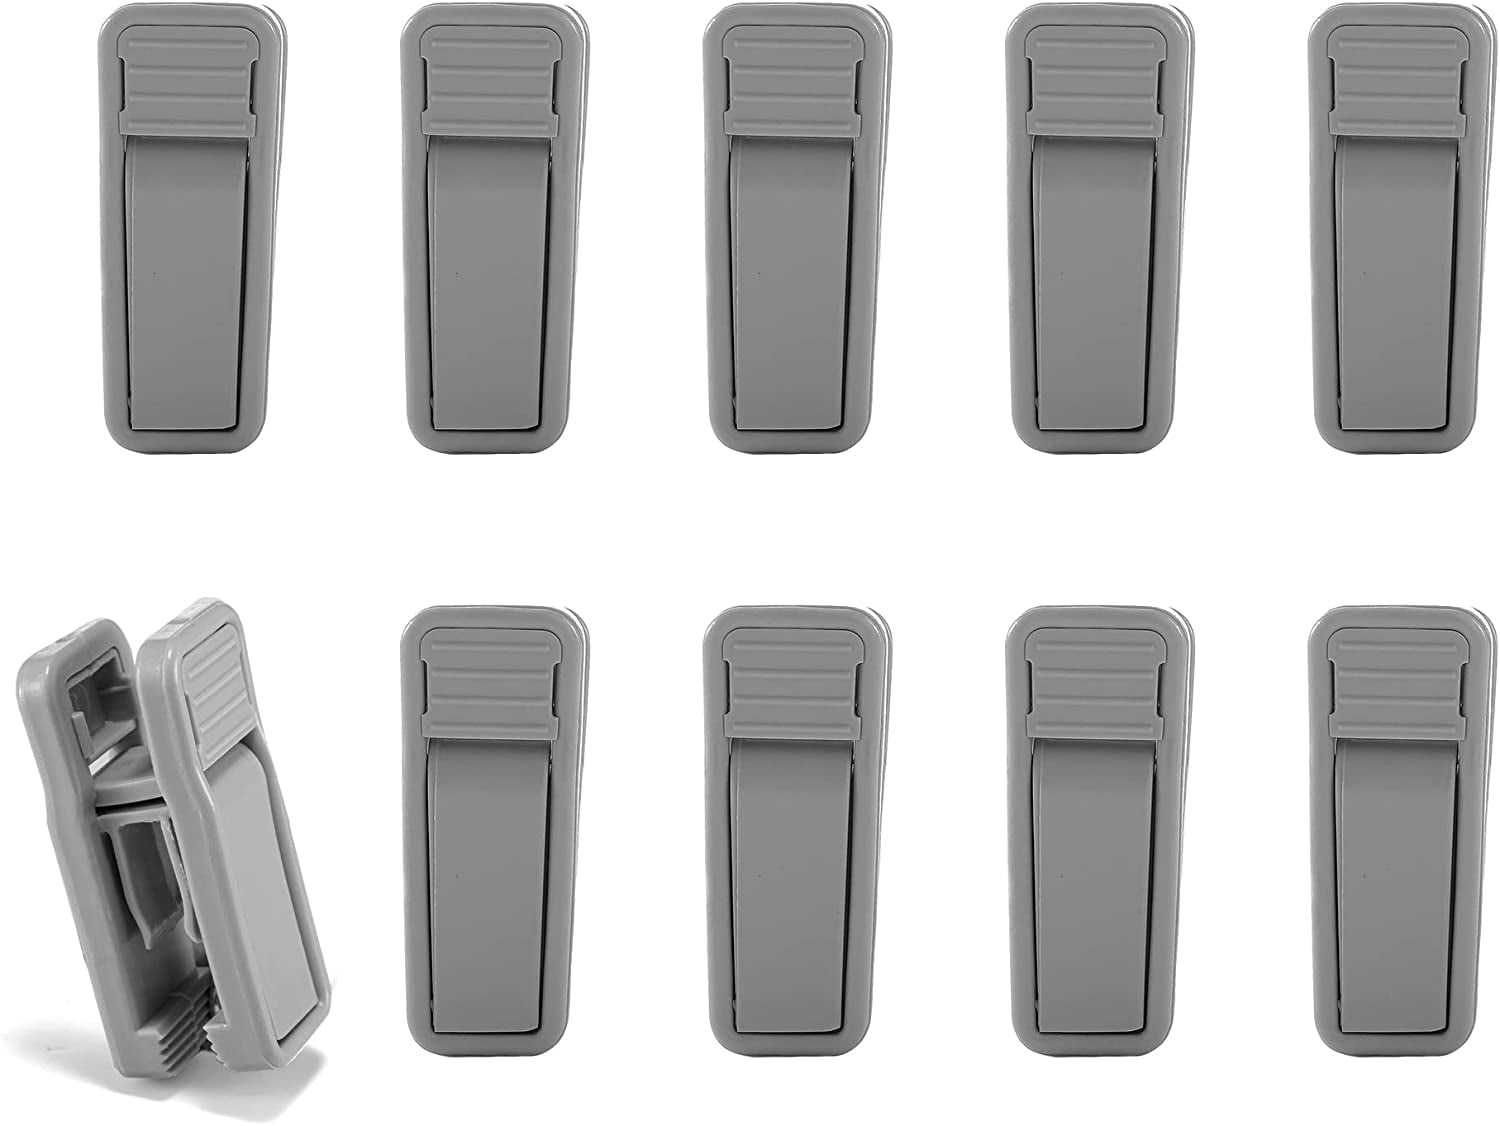 HOUSE DAY Grey Plastic Finger Clips for Hangers, 100 Pack Pants